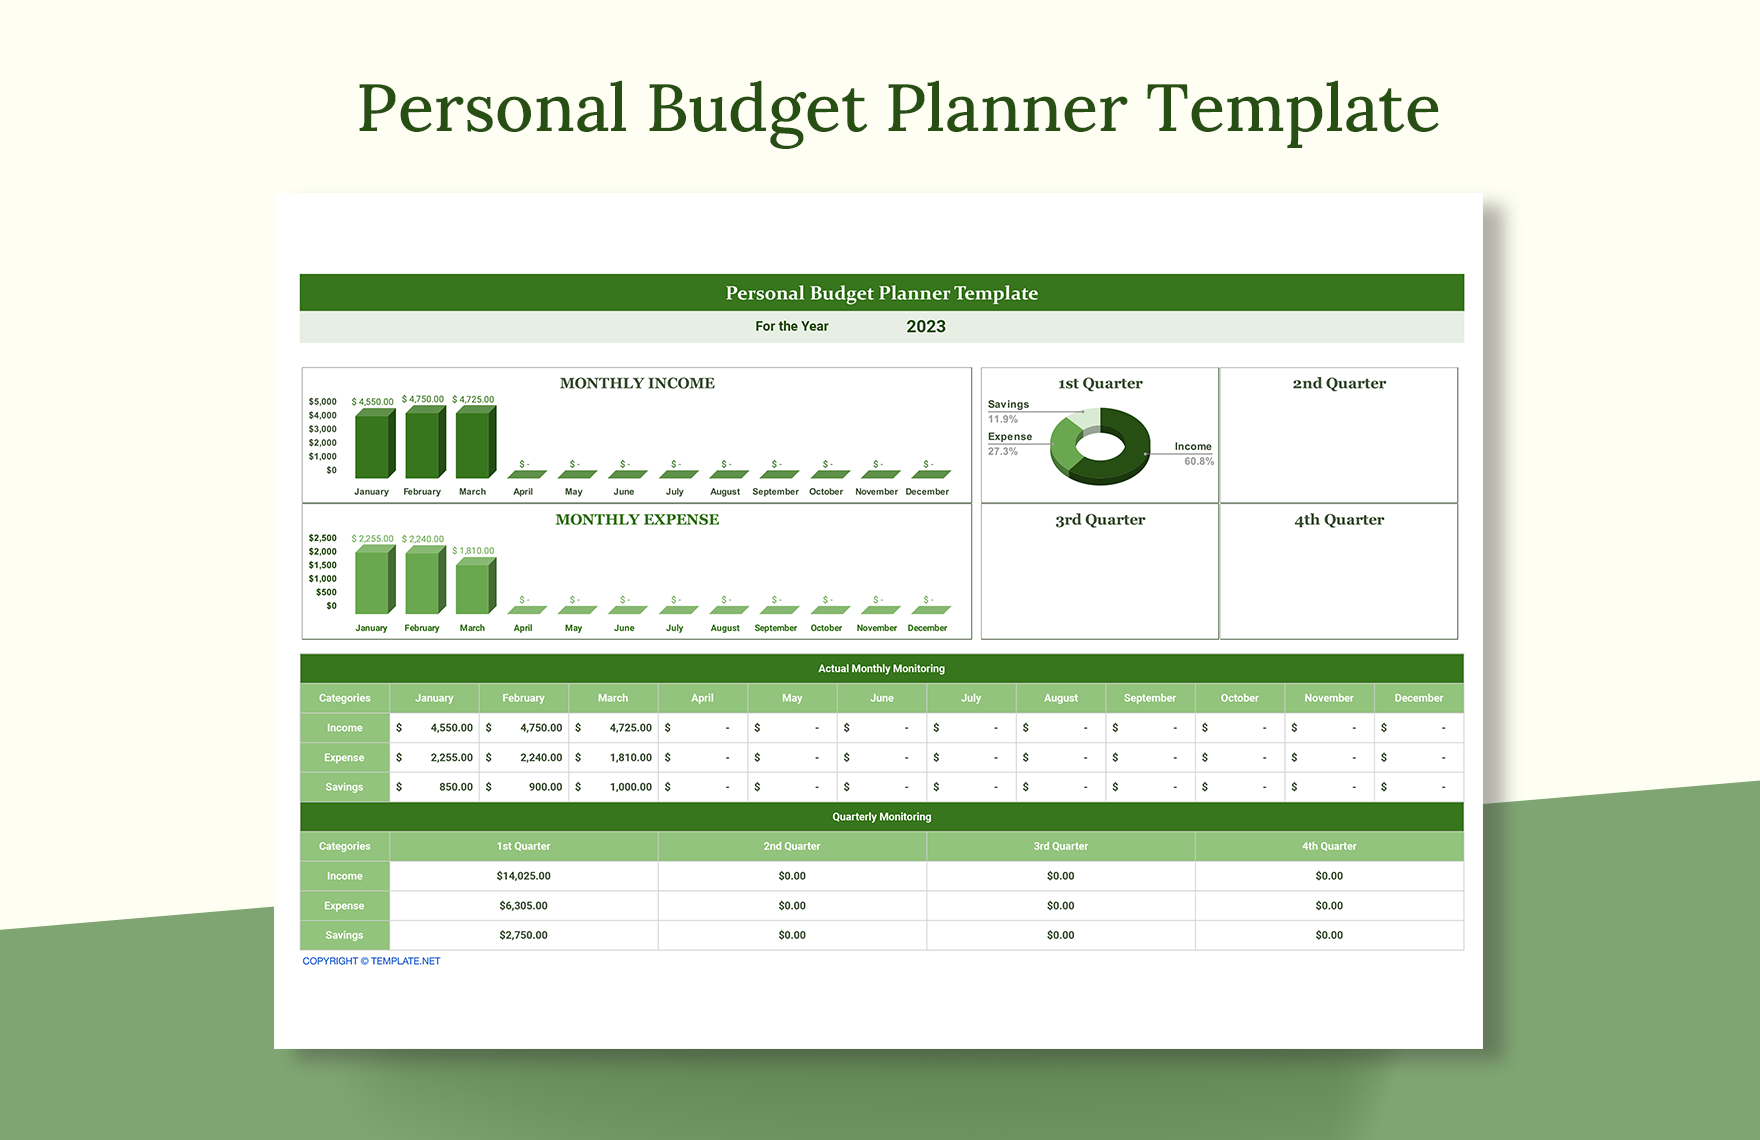 Personal Budget Planner Template Download in Word, Google Docs, Excel